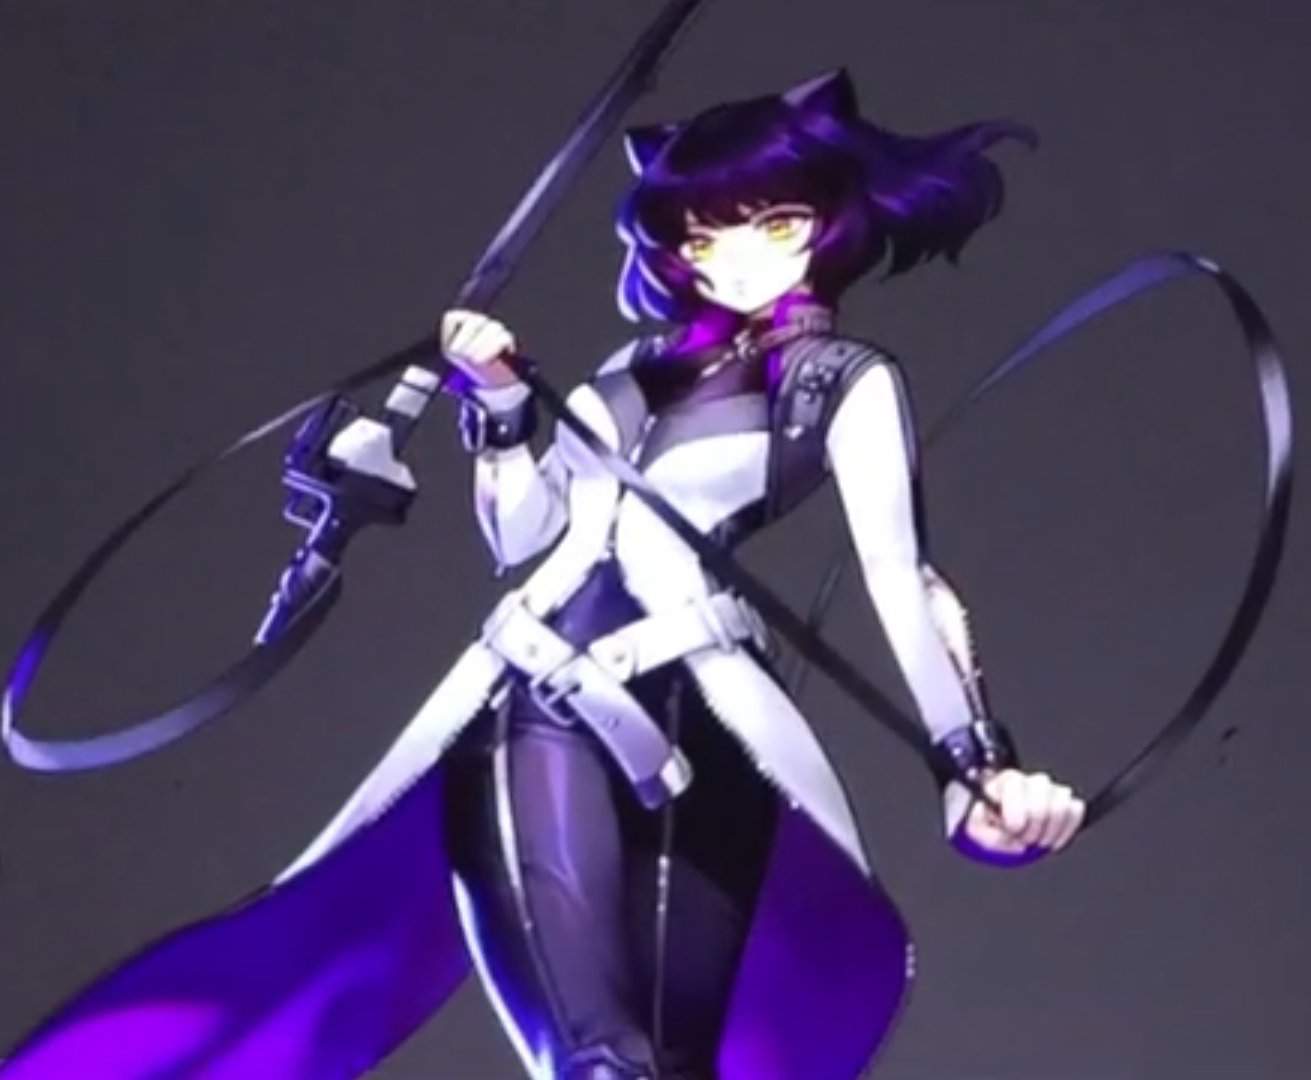 Blake's new Vol 7 outfit. 